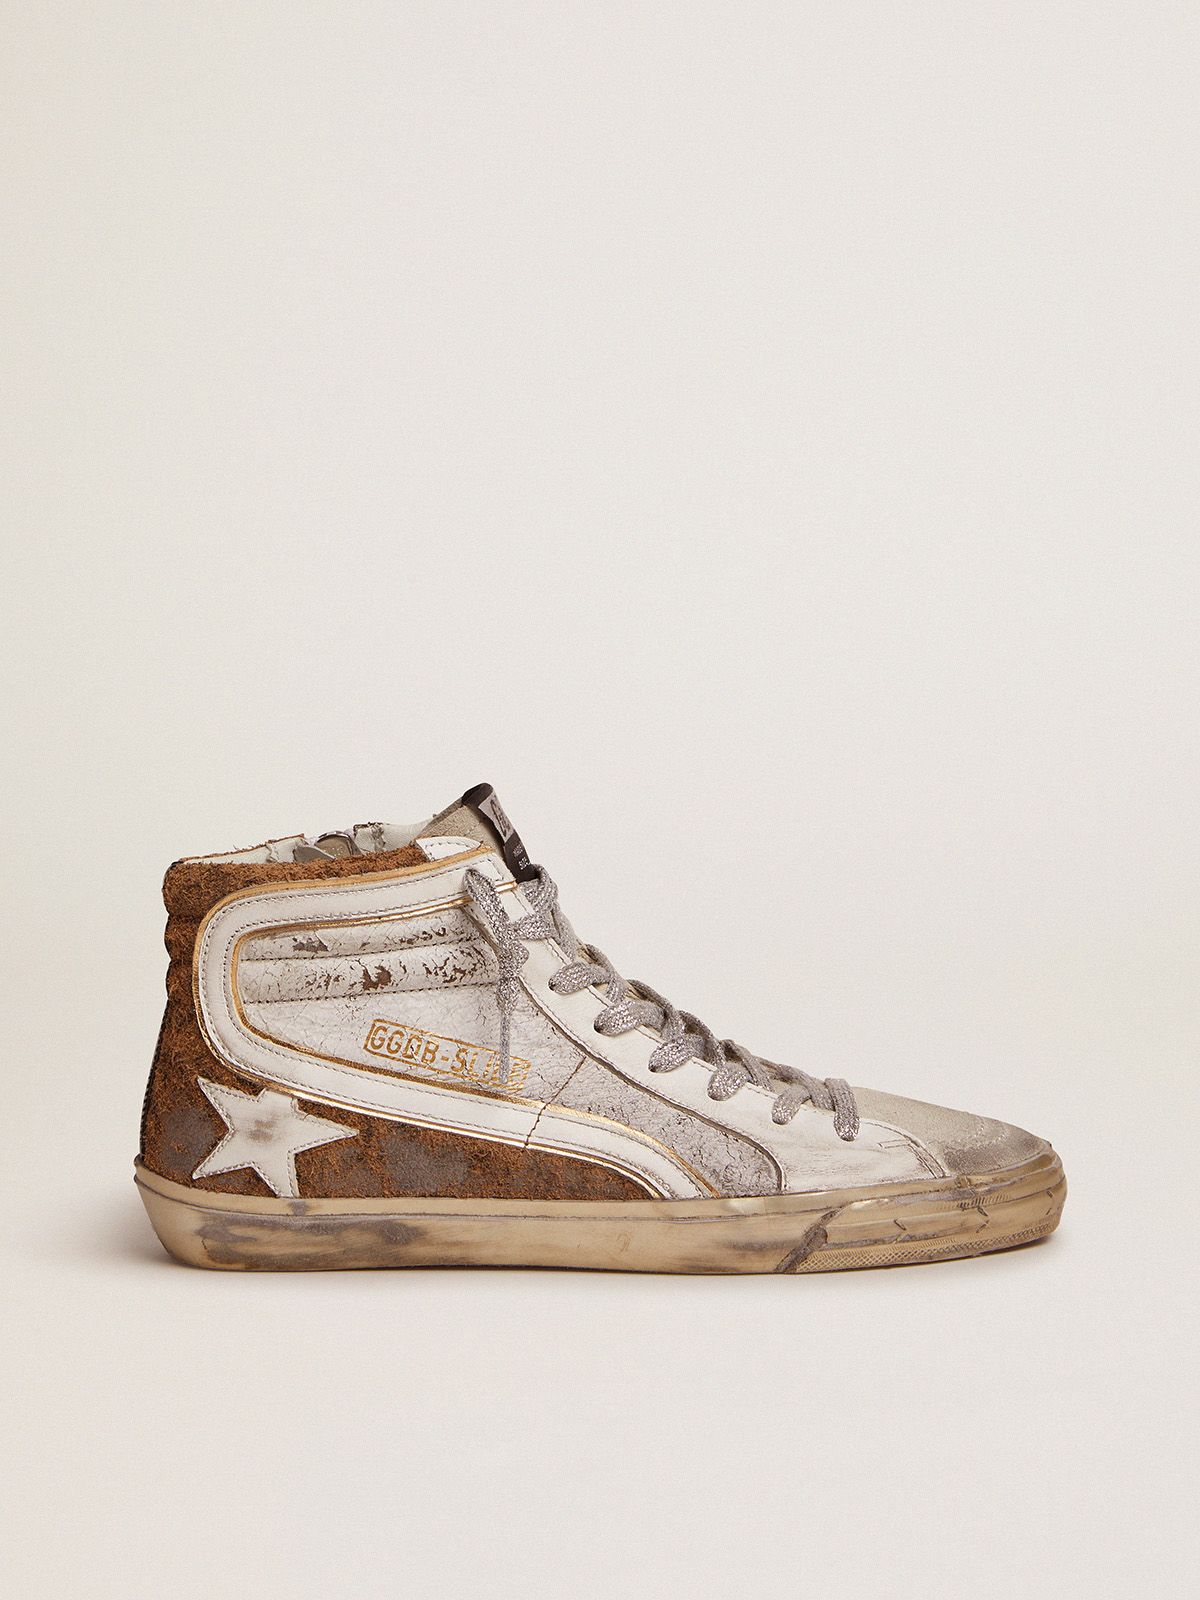 golden goose suede in crackle leopard-print Slide sneakers leather and